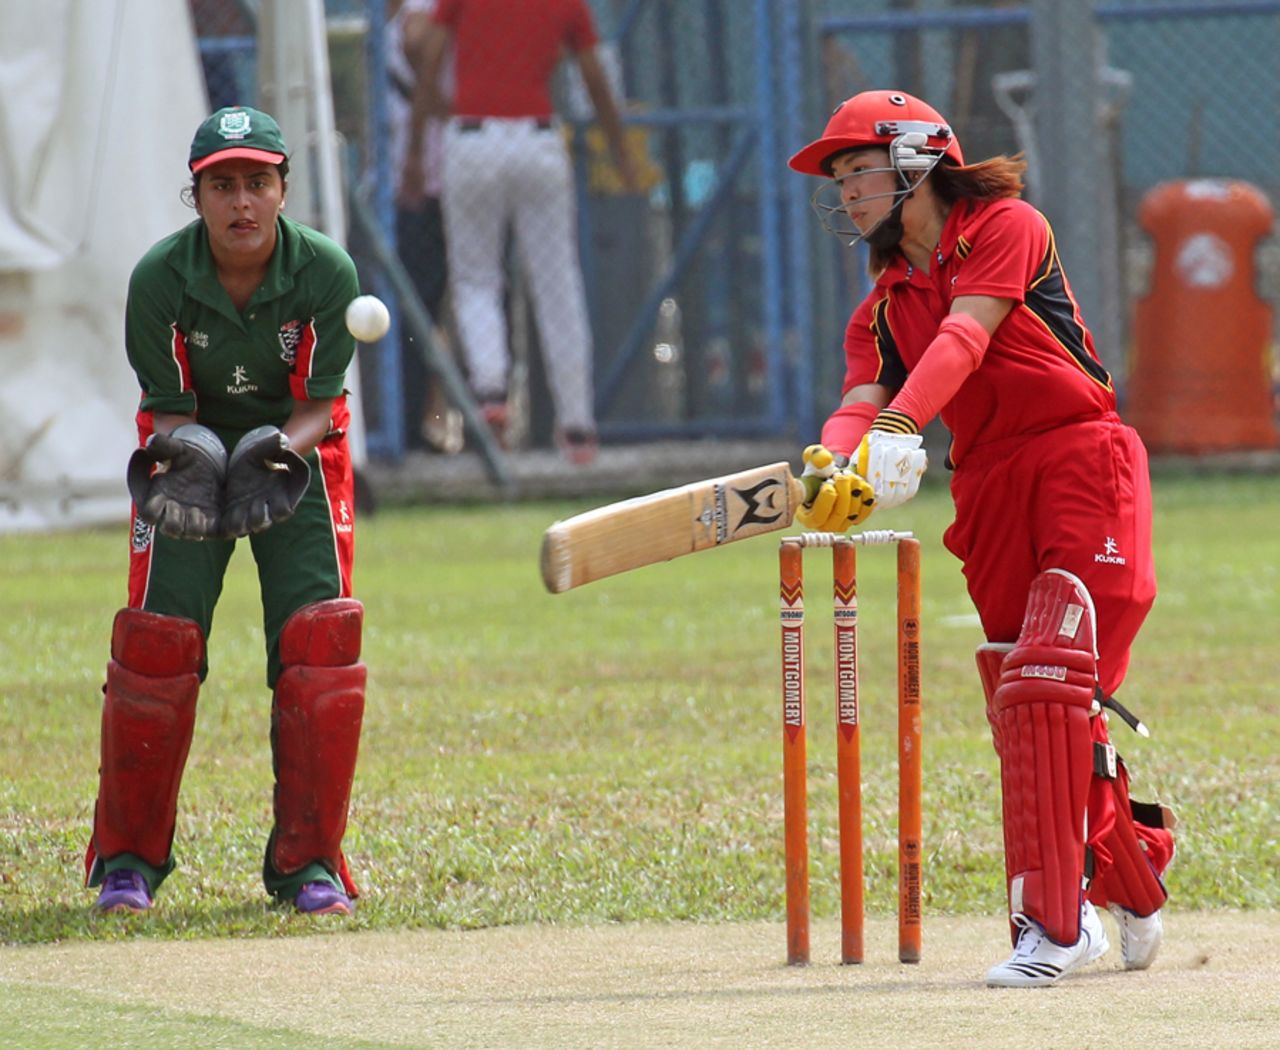 Natural Yip and Reenu Gill in action during the 3rd/4th play-off match in the Women's T20 match at Mission Road on 14th October 2012